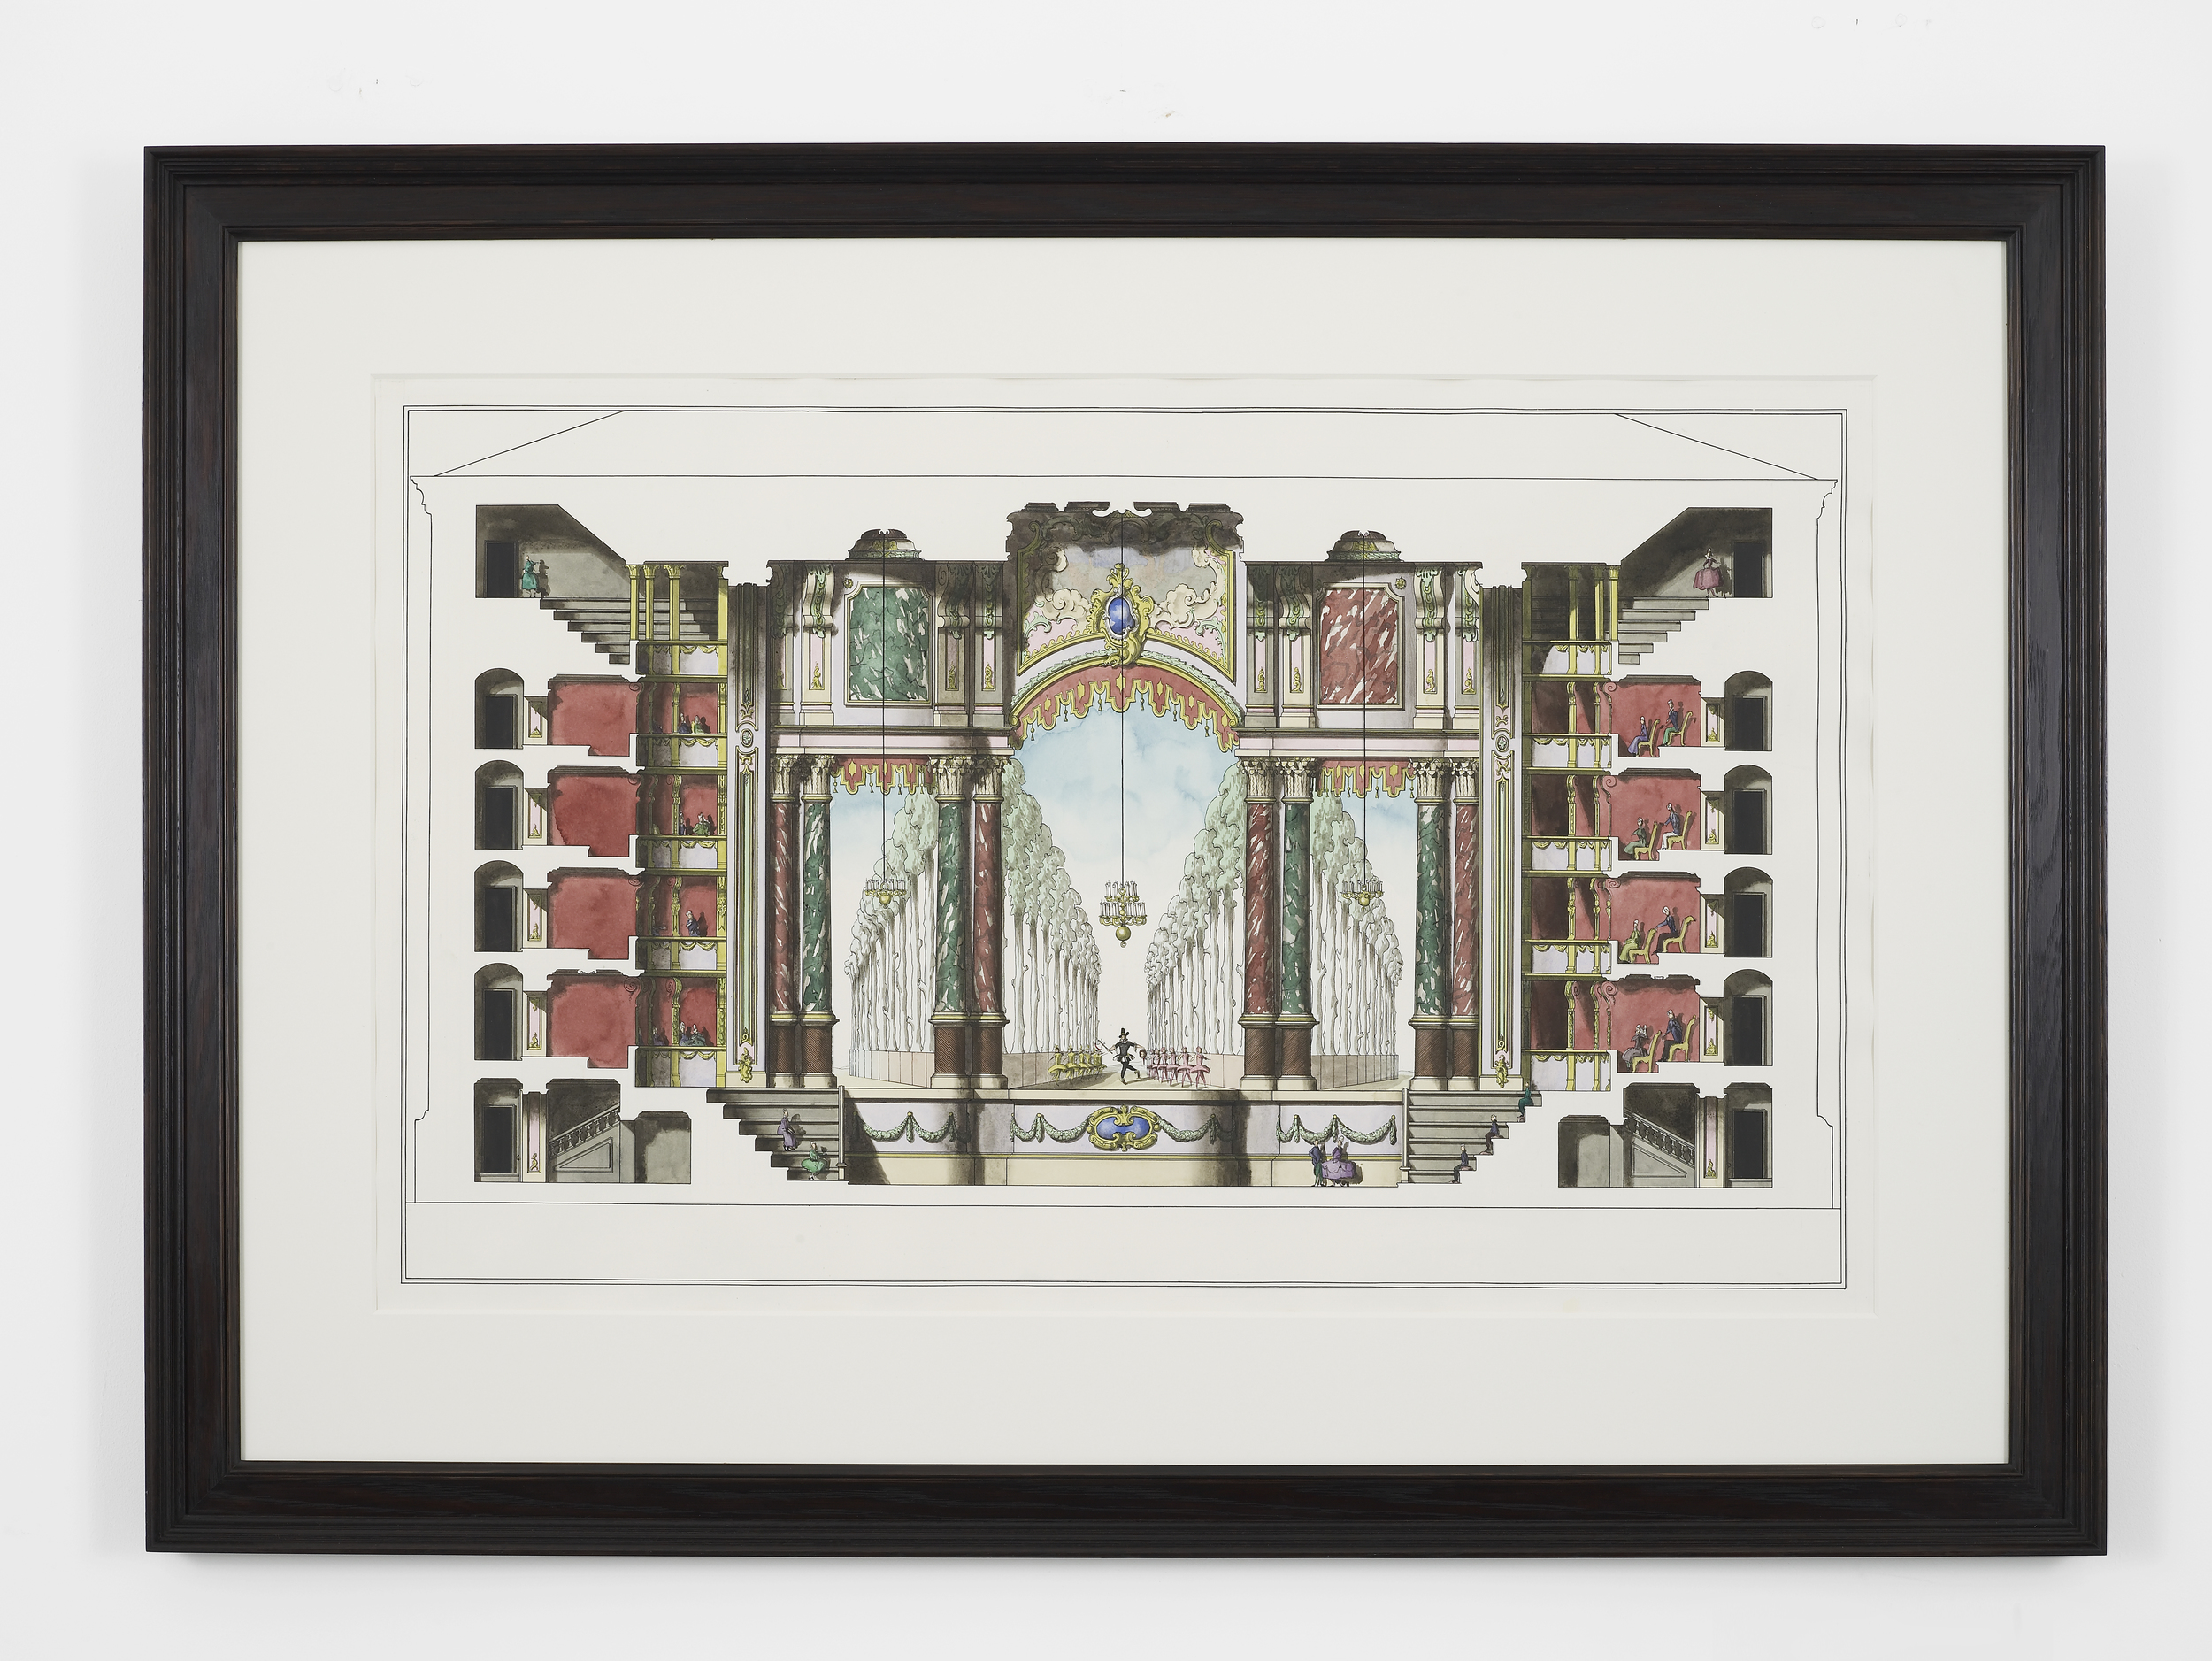     Theatre Section with Stage Design for an Oliver Cromwell Ballet 2014 Ink and watercolour on paper in artist’s frame 102 x 142.5 x 4.2 cm / 40.1 x 56.1 x 1.6 in    